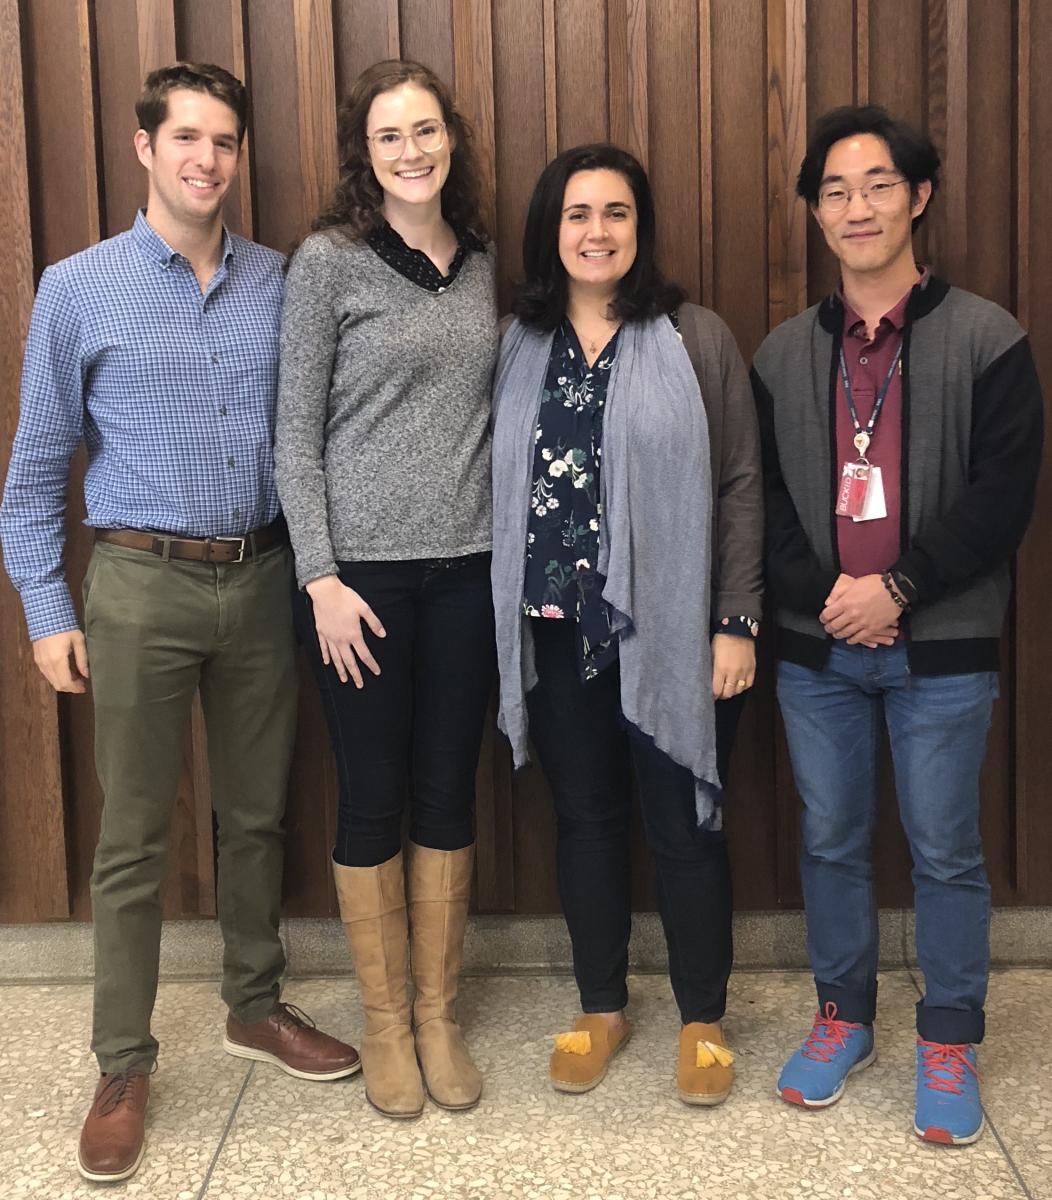 The HCS part of the Cooperstone Lab at the HCS Grad Research Symposium October 2018, Wooster, Ohio. L-to-R: Michael, Emma, Jess, TJ